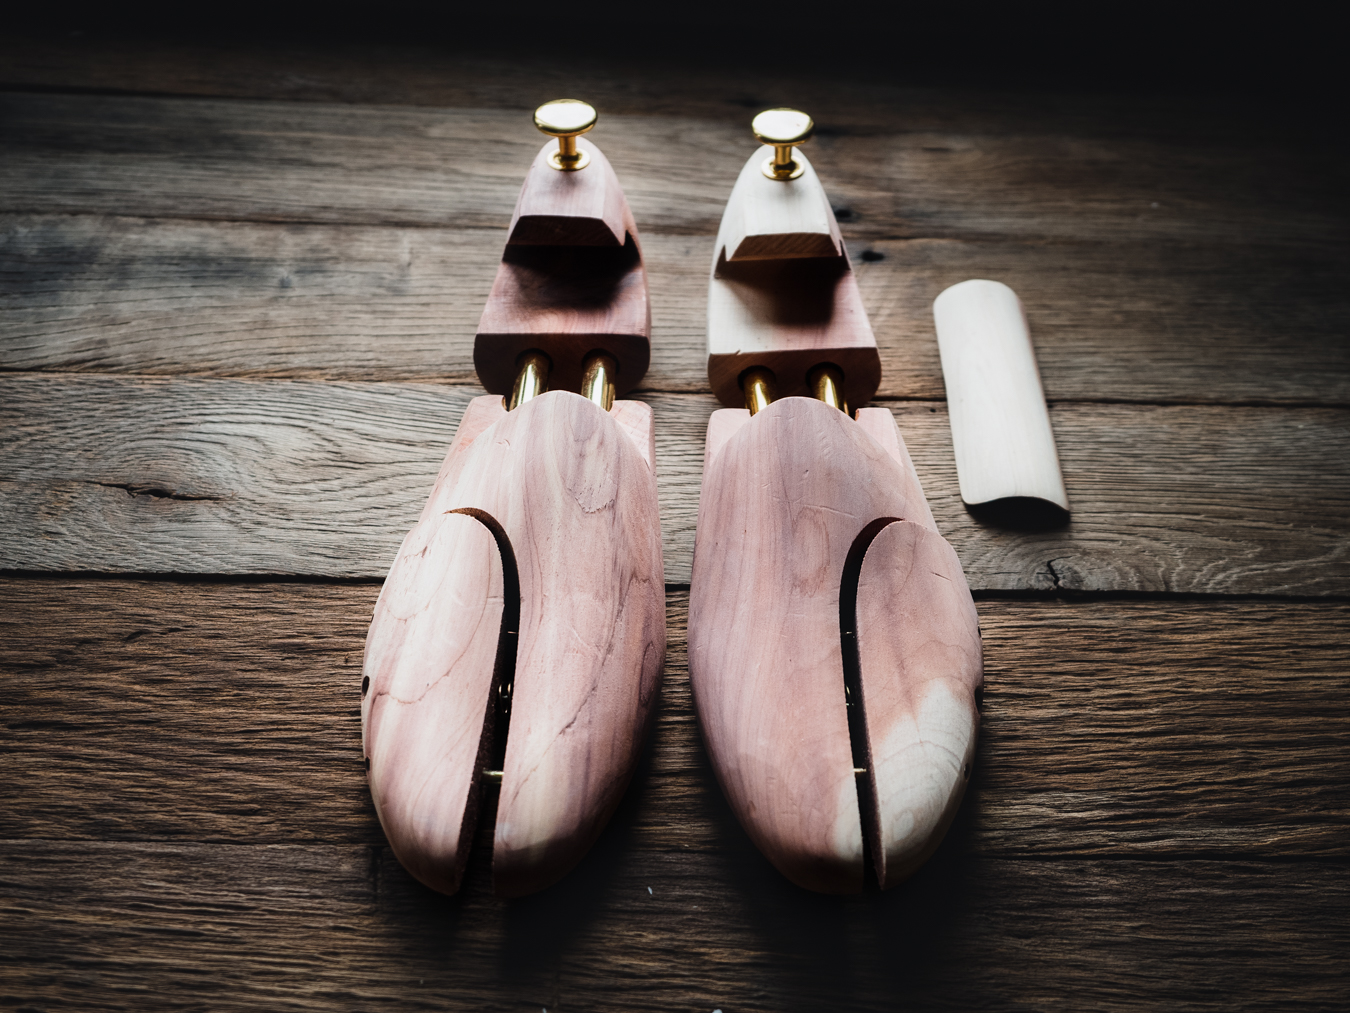 UNTREATED NATURAL WOOD SHOE TREES